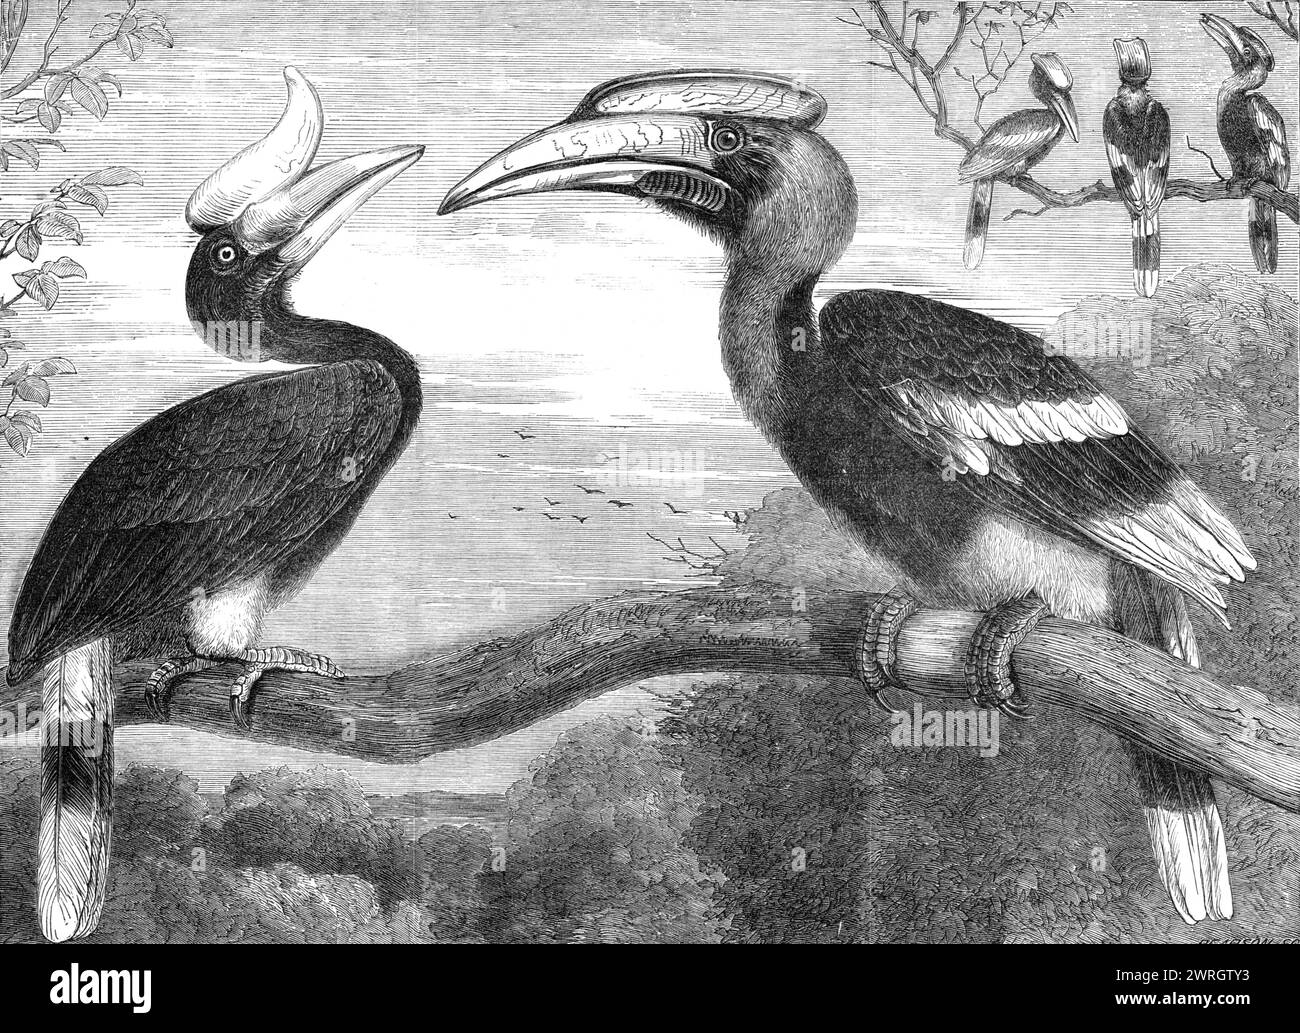 The Hornbills, in the Gardens of the Zoological Society, Regent's Park, 1864. 'We lately mentioned that Mr. Thompson, the head keeper of the Zoological Society's Gardens in Regent's Park, had returned from Calcutta, bringing with him a large number of rare and valuable animals, presented to the society by the Baboo Rajenda Mullick, Mr. A. Grote, and Mr. W. Dunn...The large hornbills...are magnificent birds, and well worthy of observation. We have engraved a drawing which represents their general appearance. Of this bird, sometimes vulgarly called the horned Indian raven, though it belongs to a Stock Photo